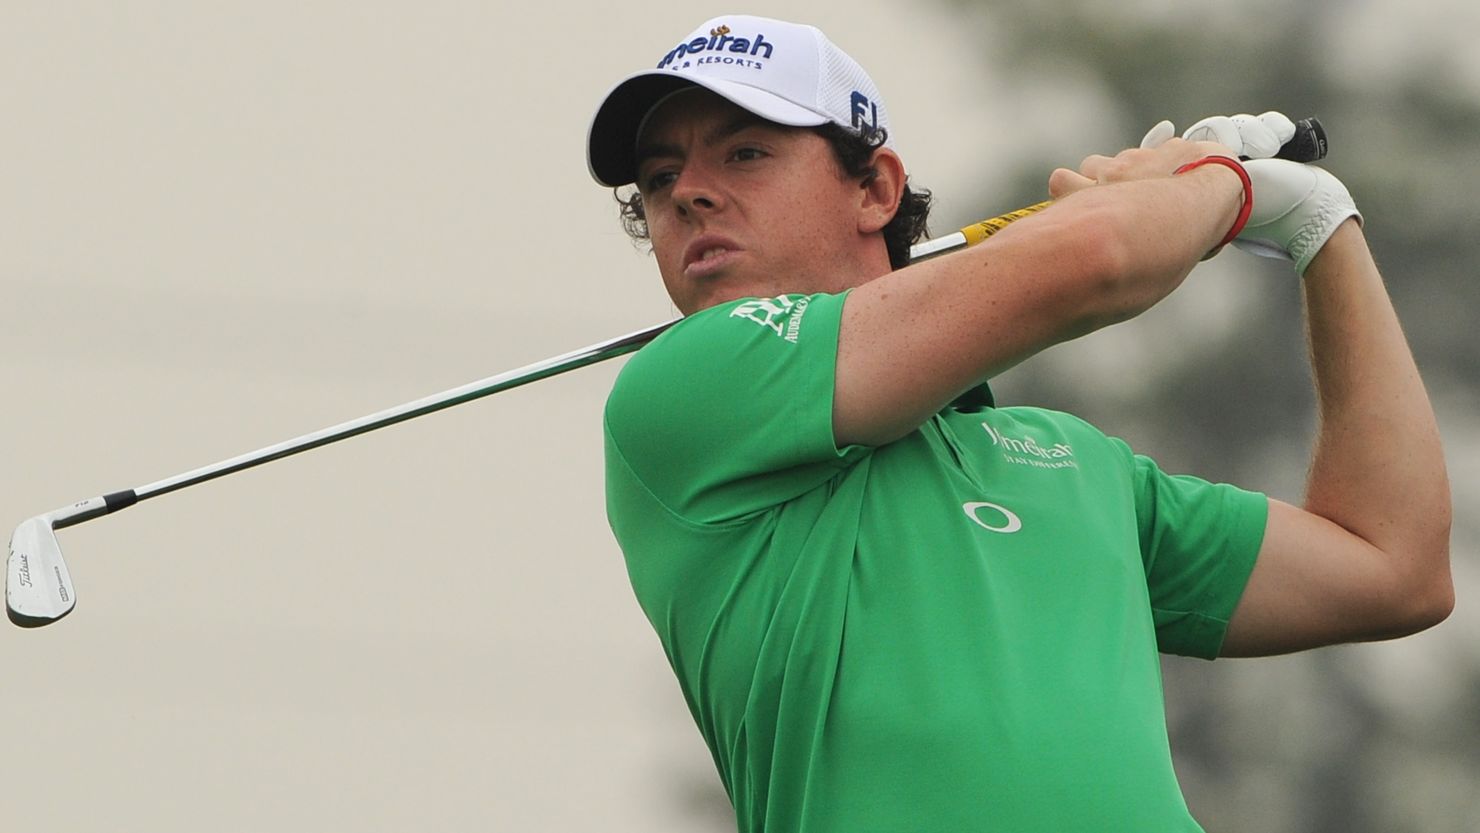 Northern Ireland's Rory McIlroy was named as the PGA Tour Player of the Year for 2012 after a stellar season.